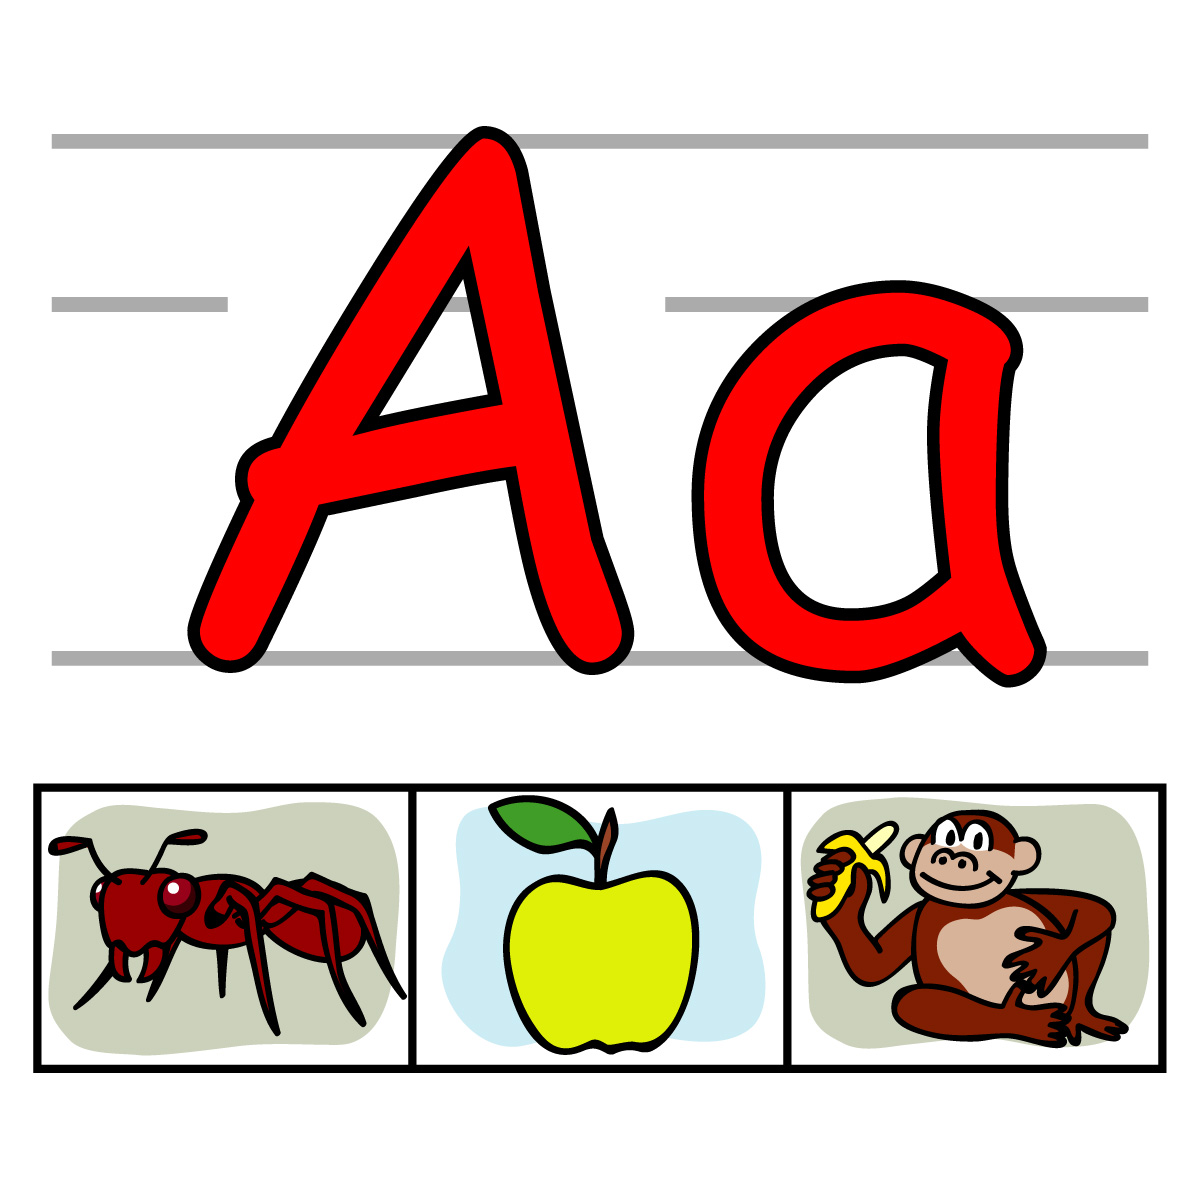 Alphabet Clipart - Free Printable Images for Learning and Decorative ...